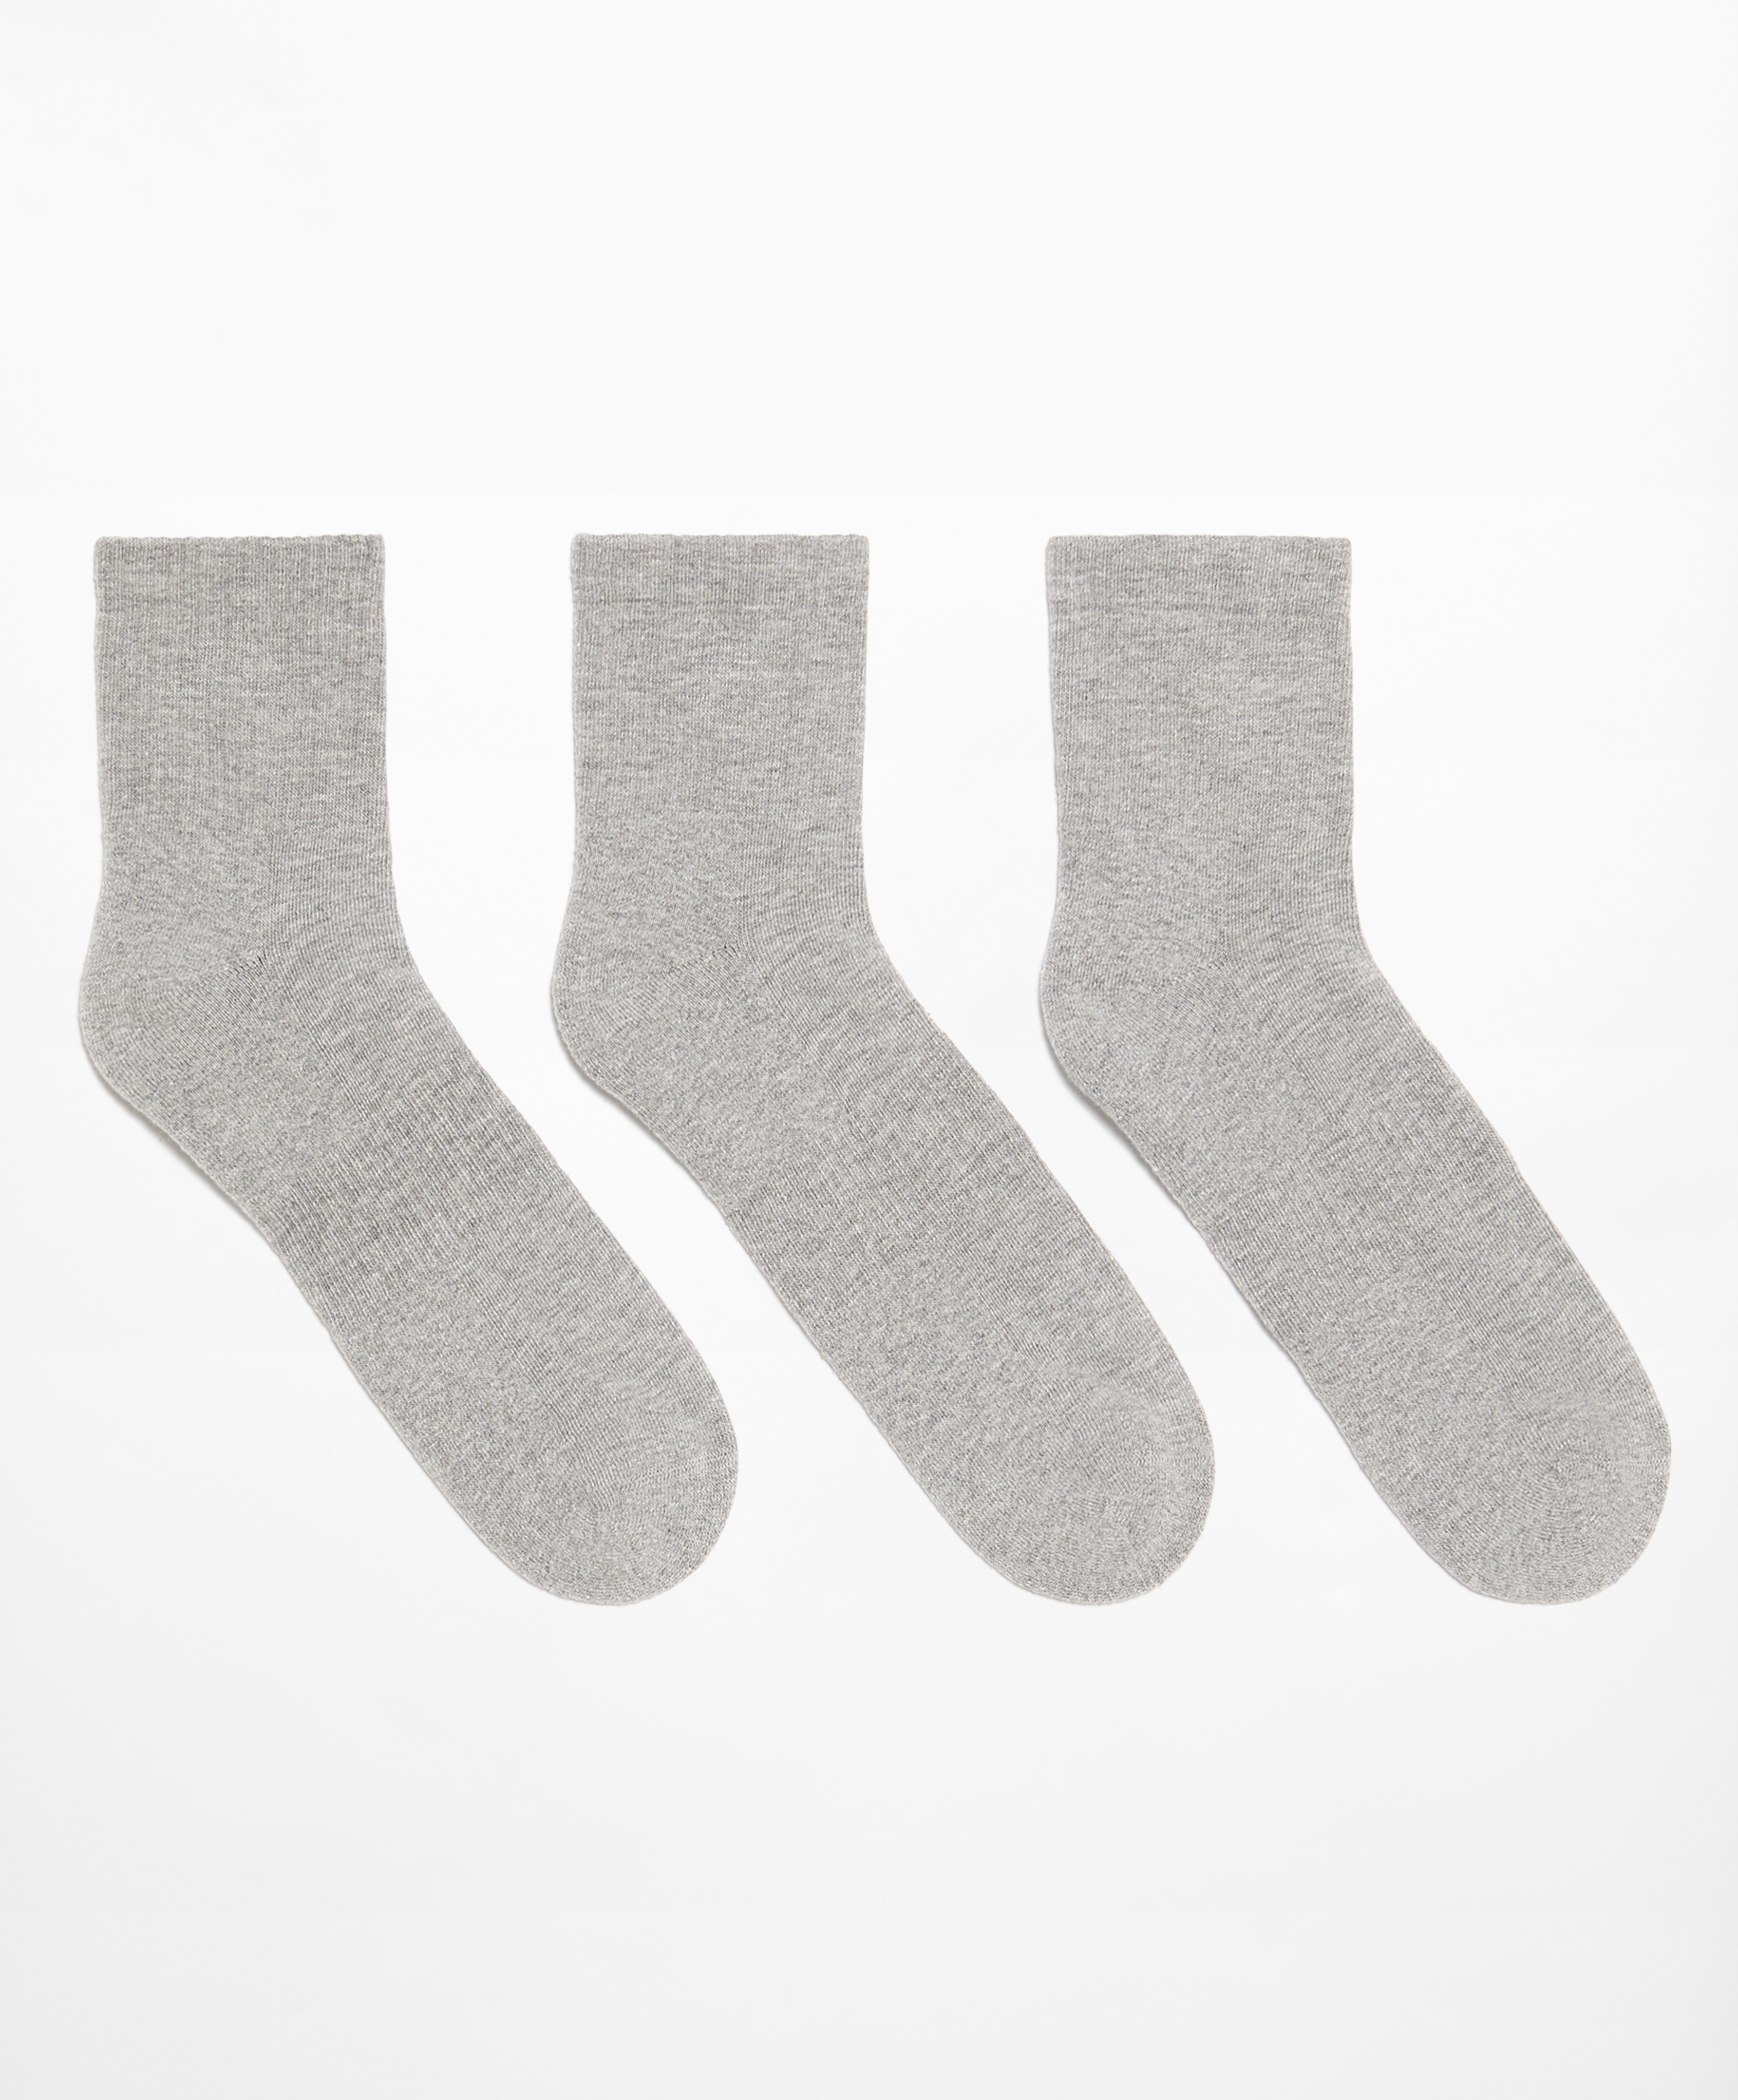 3 pairs of quarter sports socks with cotton